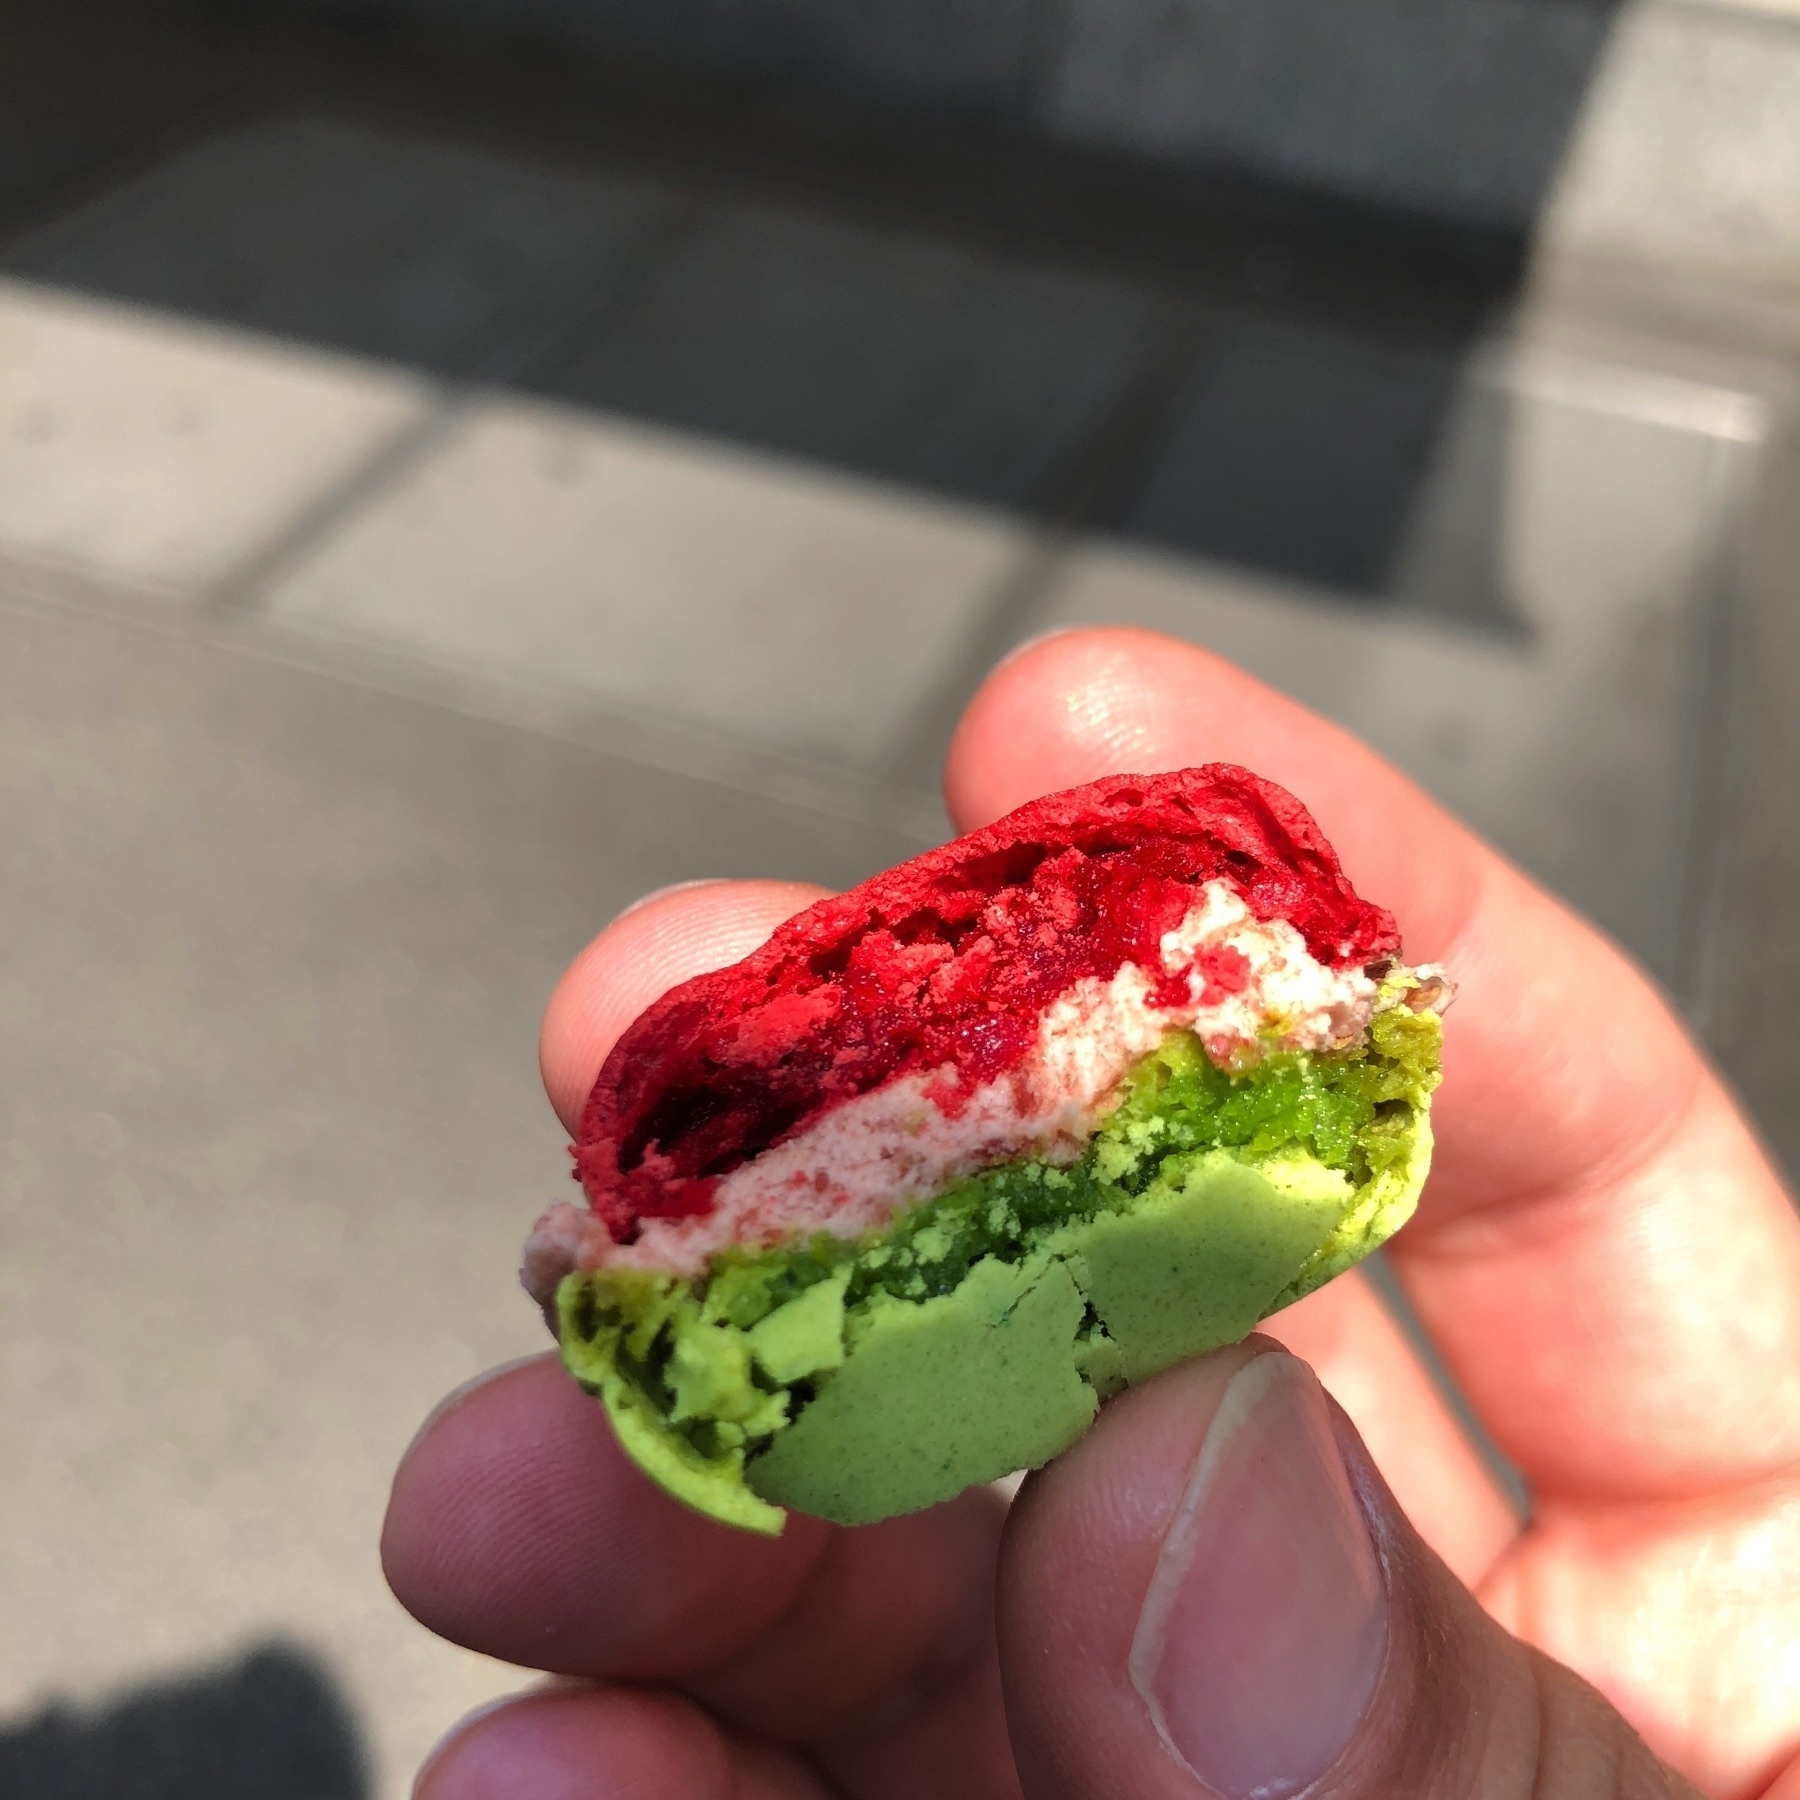 Photo of a bright red and green Luxemburgerli with white filling, with a bite taken out of it.